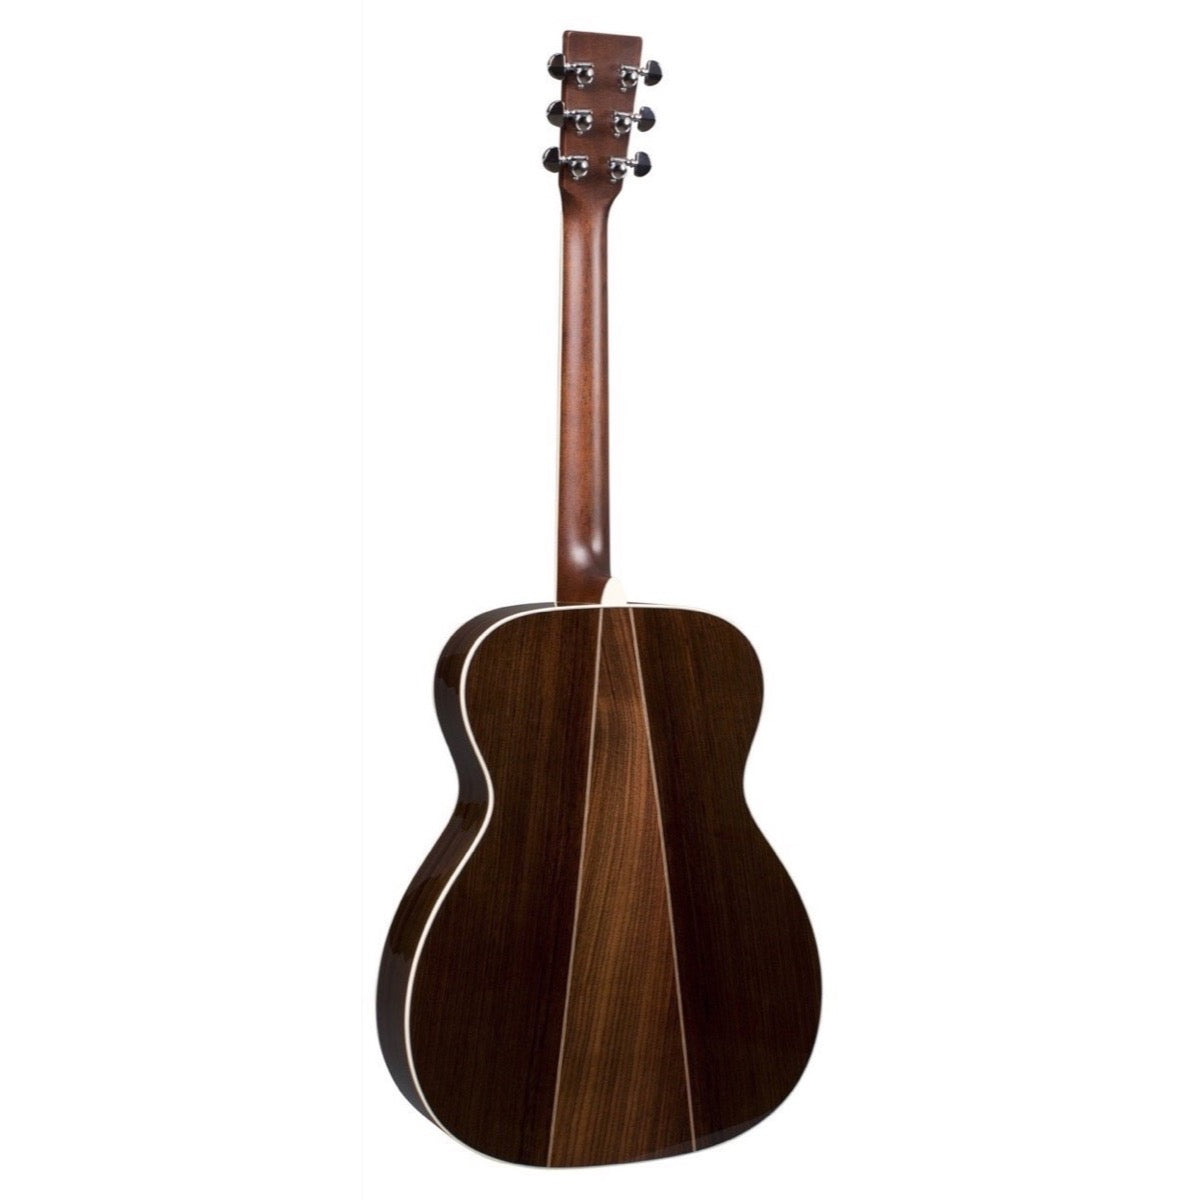 Martin 2018 M-36 Redesign Acoustic Guitar (with Case), Natural